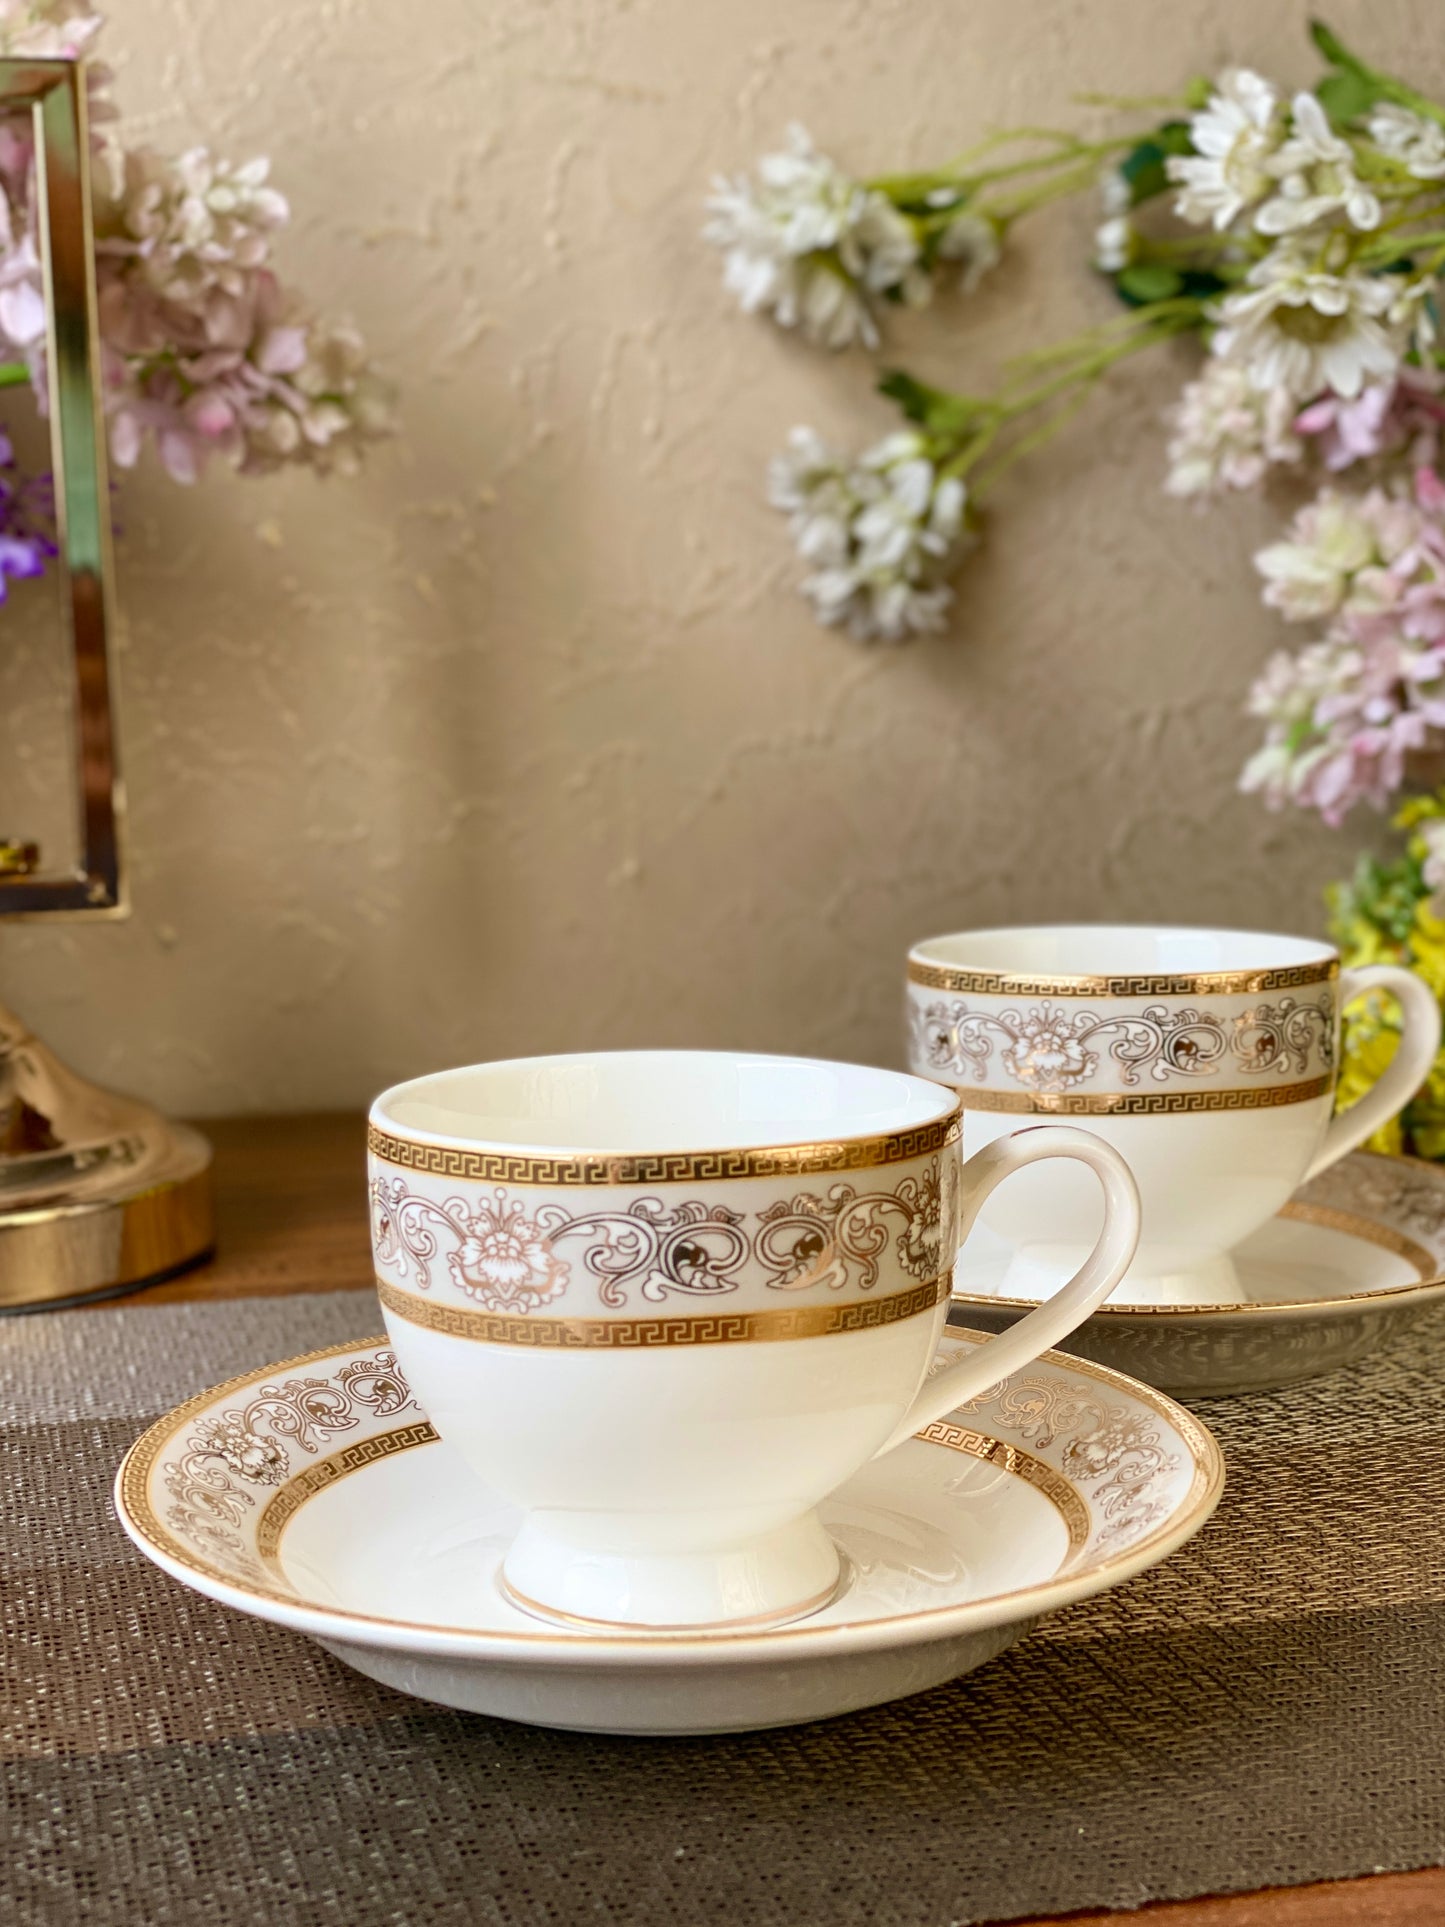 Mughal Gold and Grey Cup and Saucer Set (6 Cups and 6 Saucers) - Vigneto